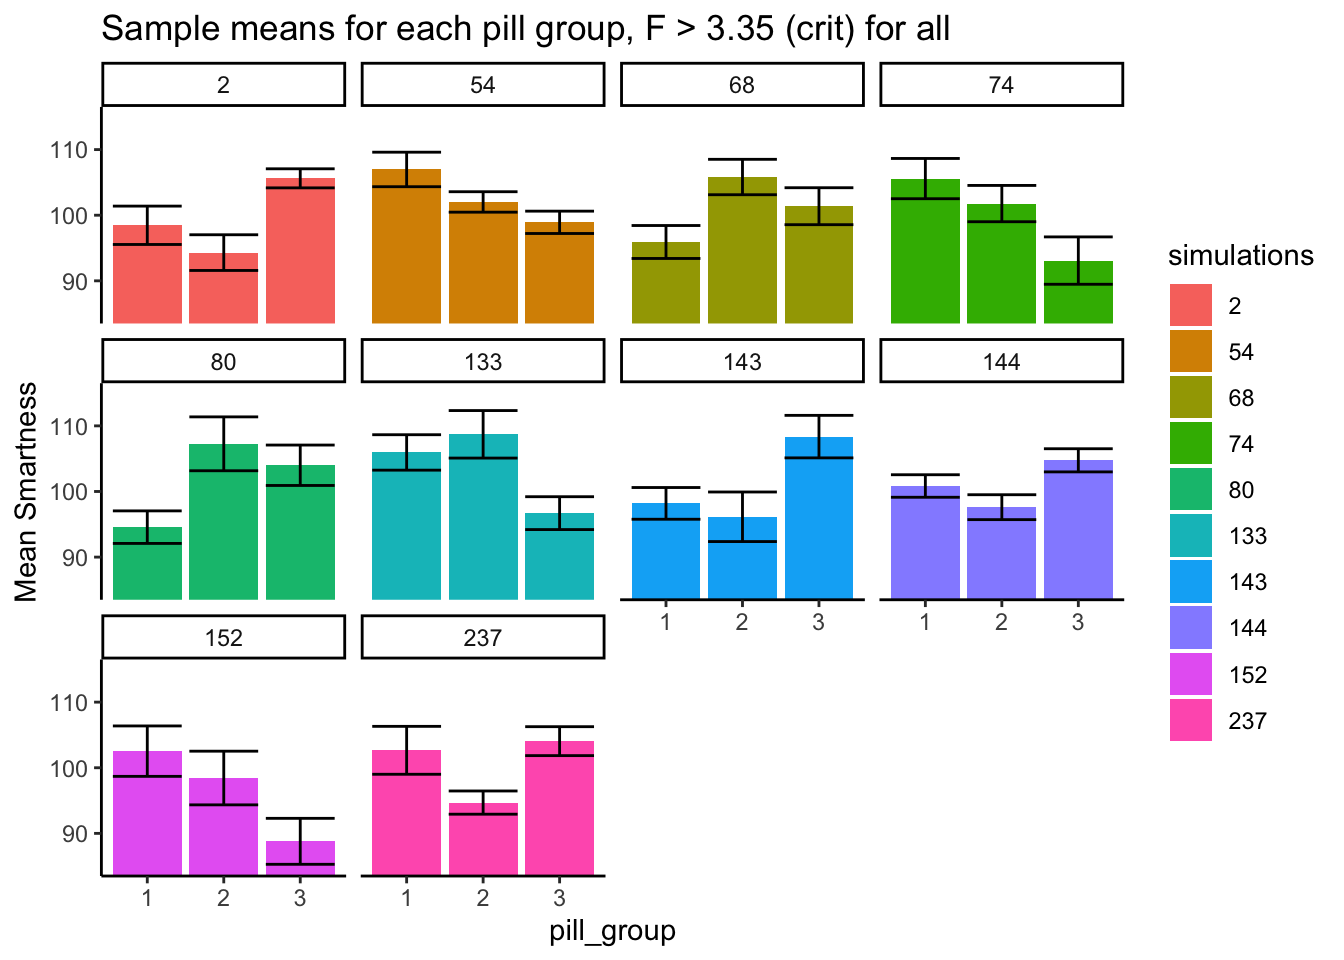 Different patterns of group means under the null when F is above critical value. We would make type I errors if our data looked like any of these simulations.